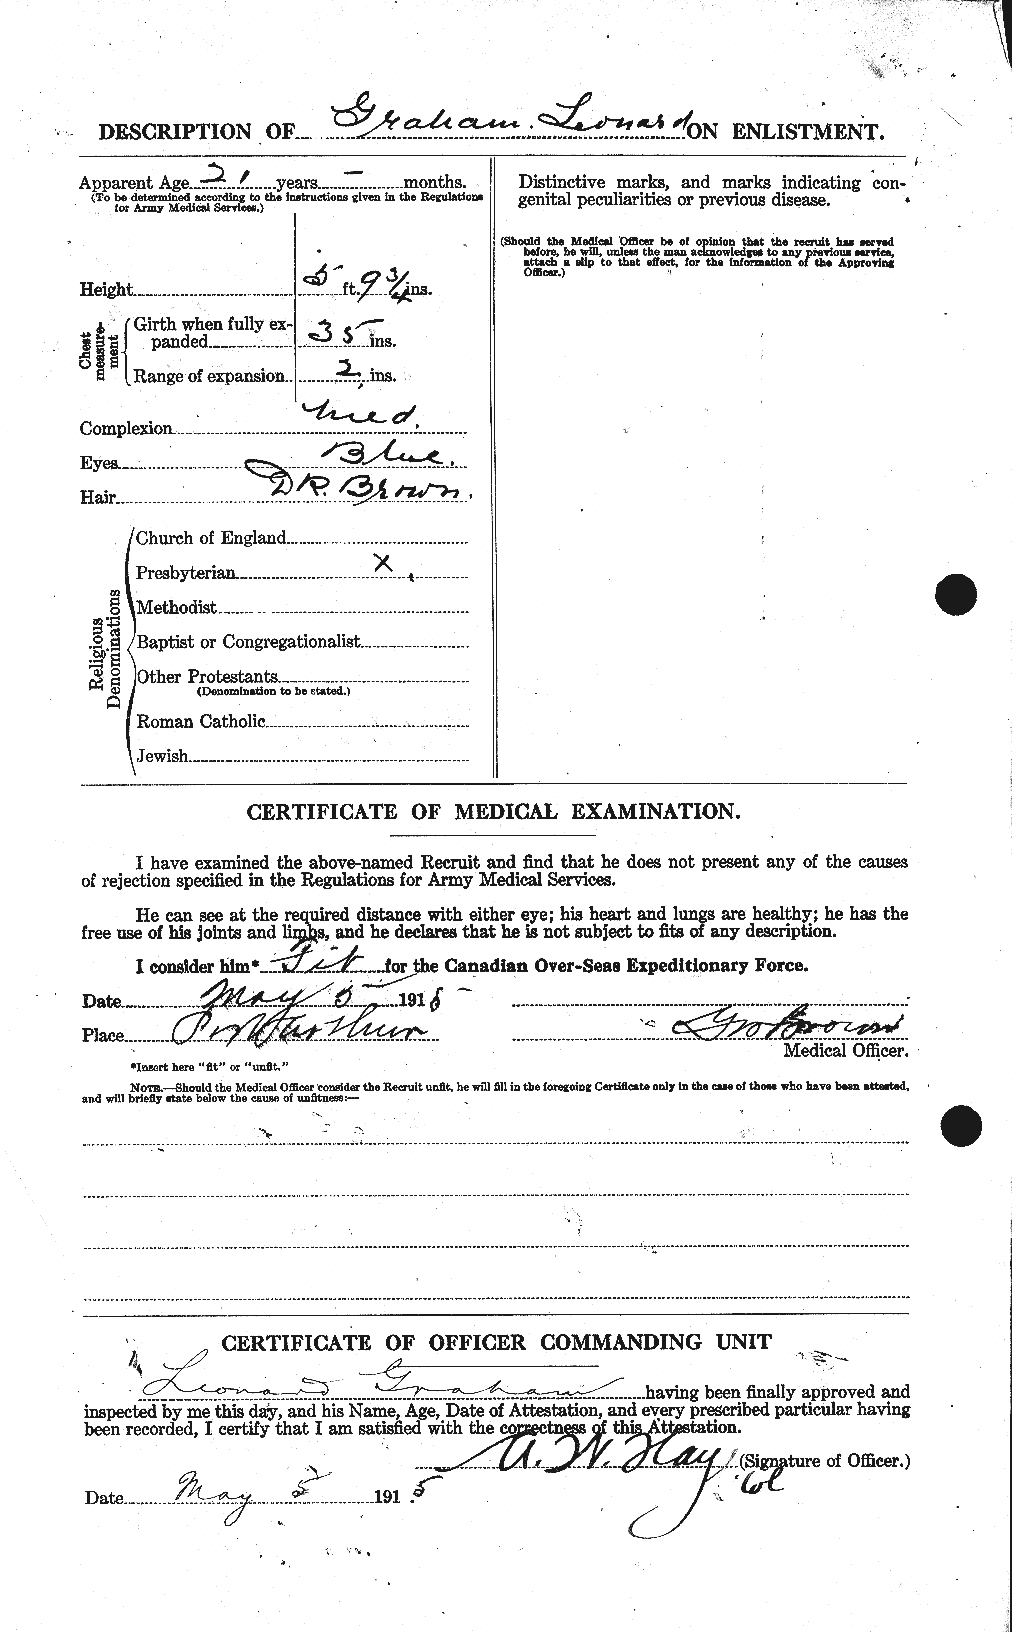 Personnel Records of the First World War - CEF 359266b